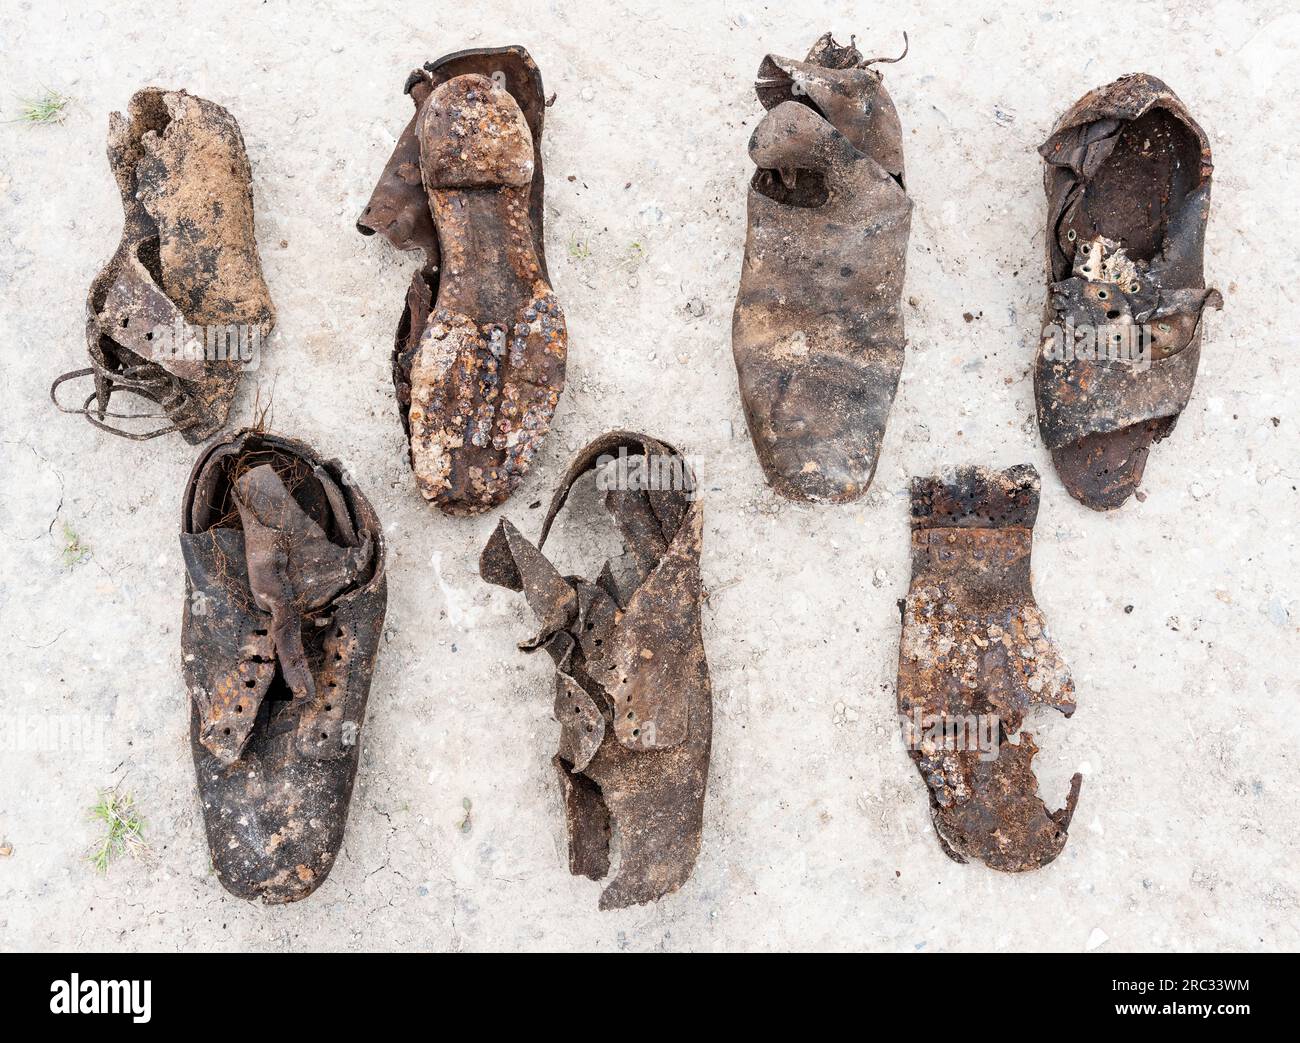 A collection of Victorian footwear buried under the earth floor of a Joiners workshop to ward off evil spirits or bring good luck, East Yorkshire, UK Stock Photo